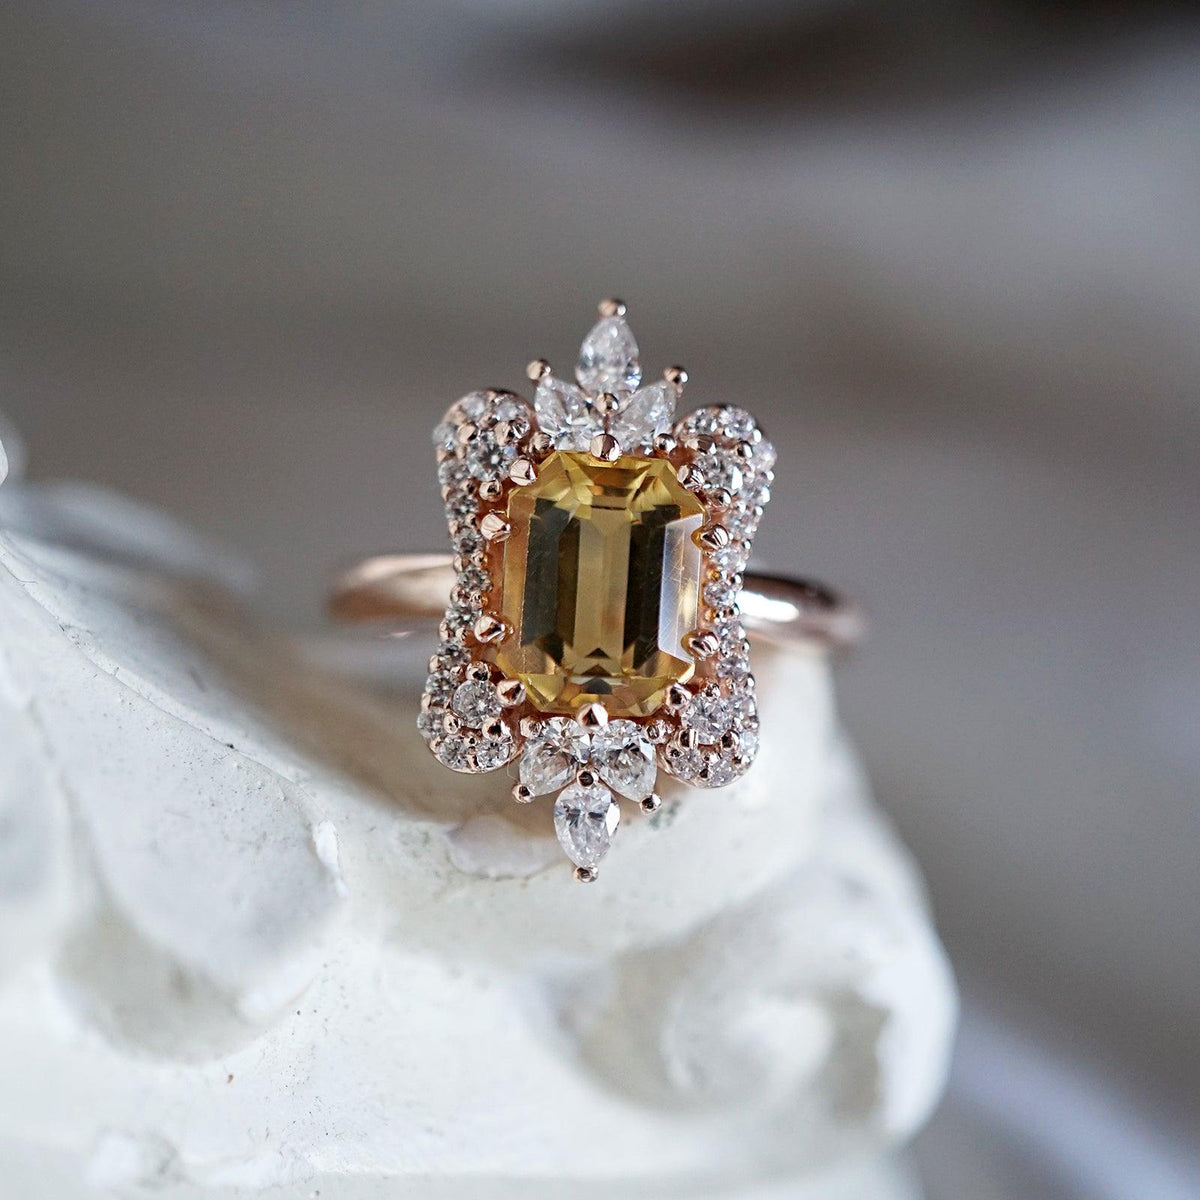 Eleanor Citrine Diamond Ring in 14K and 18K Gold, and Platinum - Tippy Taste Jewelry